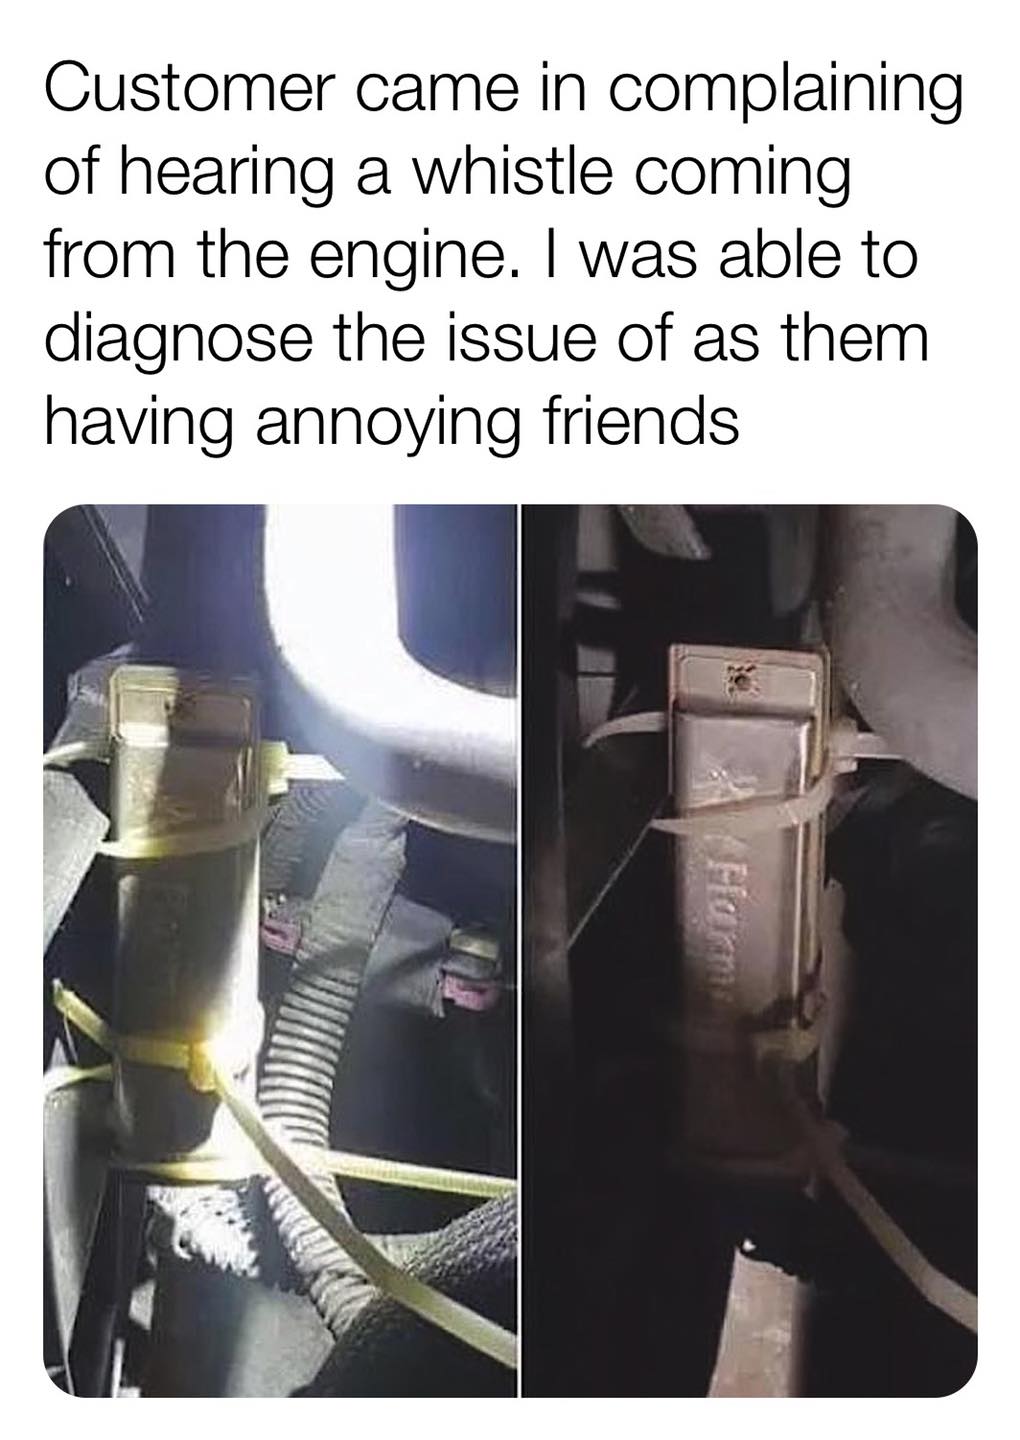 engine whistling meme - Customer came in complaining of hearing a whistle coming from the engine. I was able to diagnose the issue of as them having annoying friends Hamm